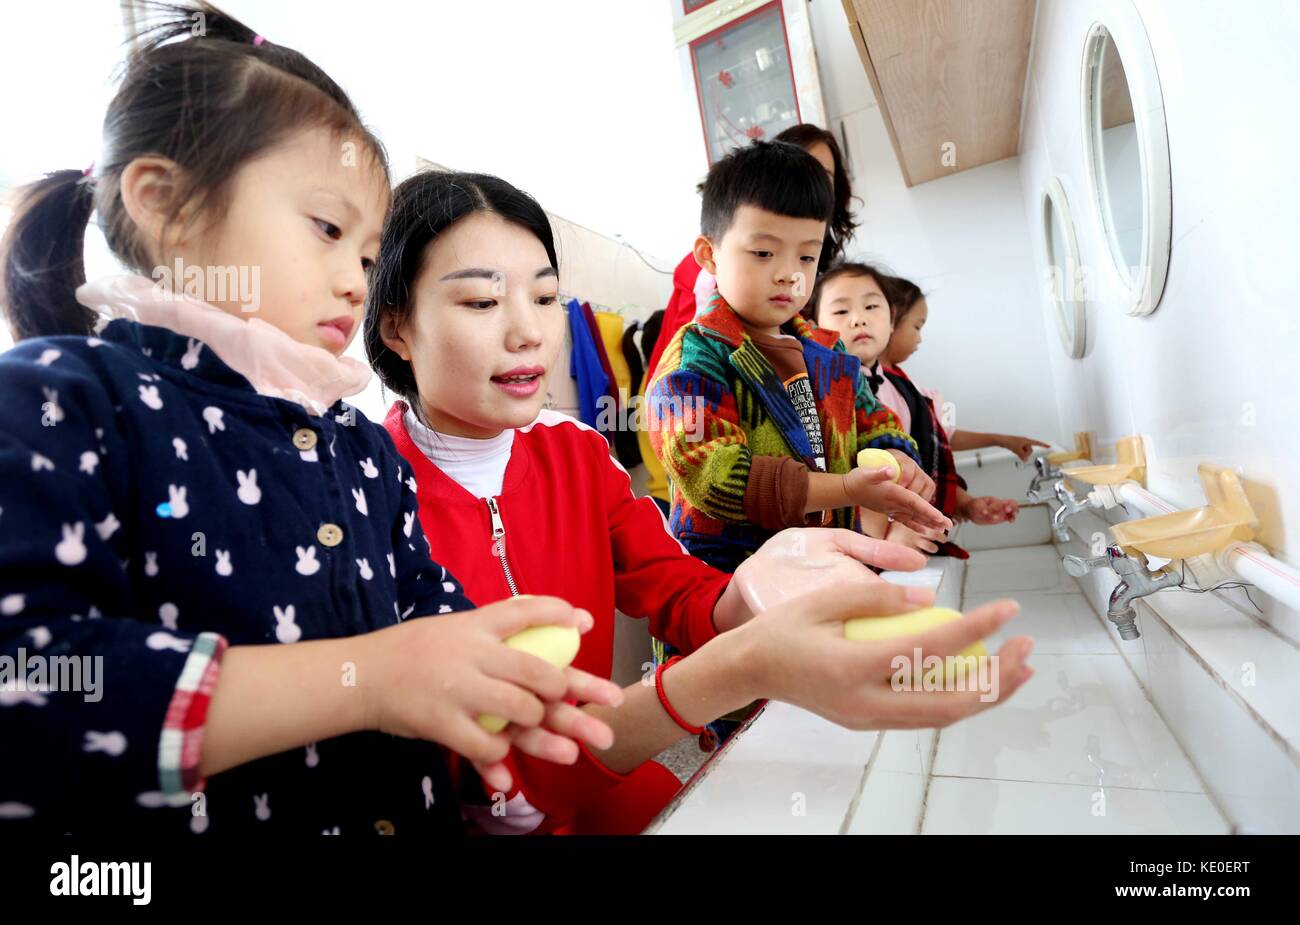 Lianyungang, Lianyungang, China. 17th Oct, 2017. Lianyungang, CHINA-13th October 2017: (EDITORIAL USE ONLY. CHINA OUT).Children learn to wash hands at a kindergarten in Lianyungang, east China's Jiangsu Province, marking the Global Hand-washing Day. Credit: SIPA Asia/ZUMA Wire/Alamy Live News Stock Photo